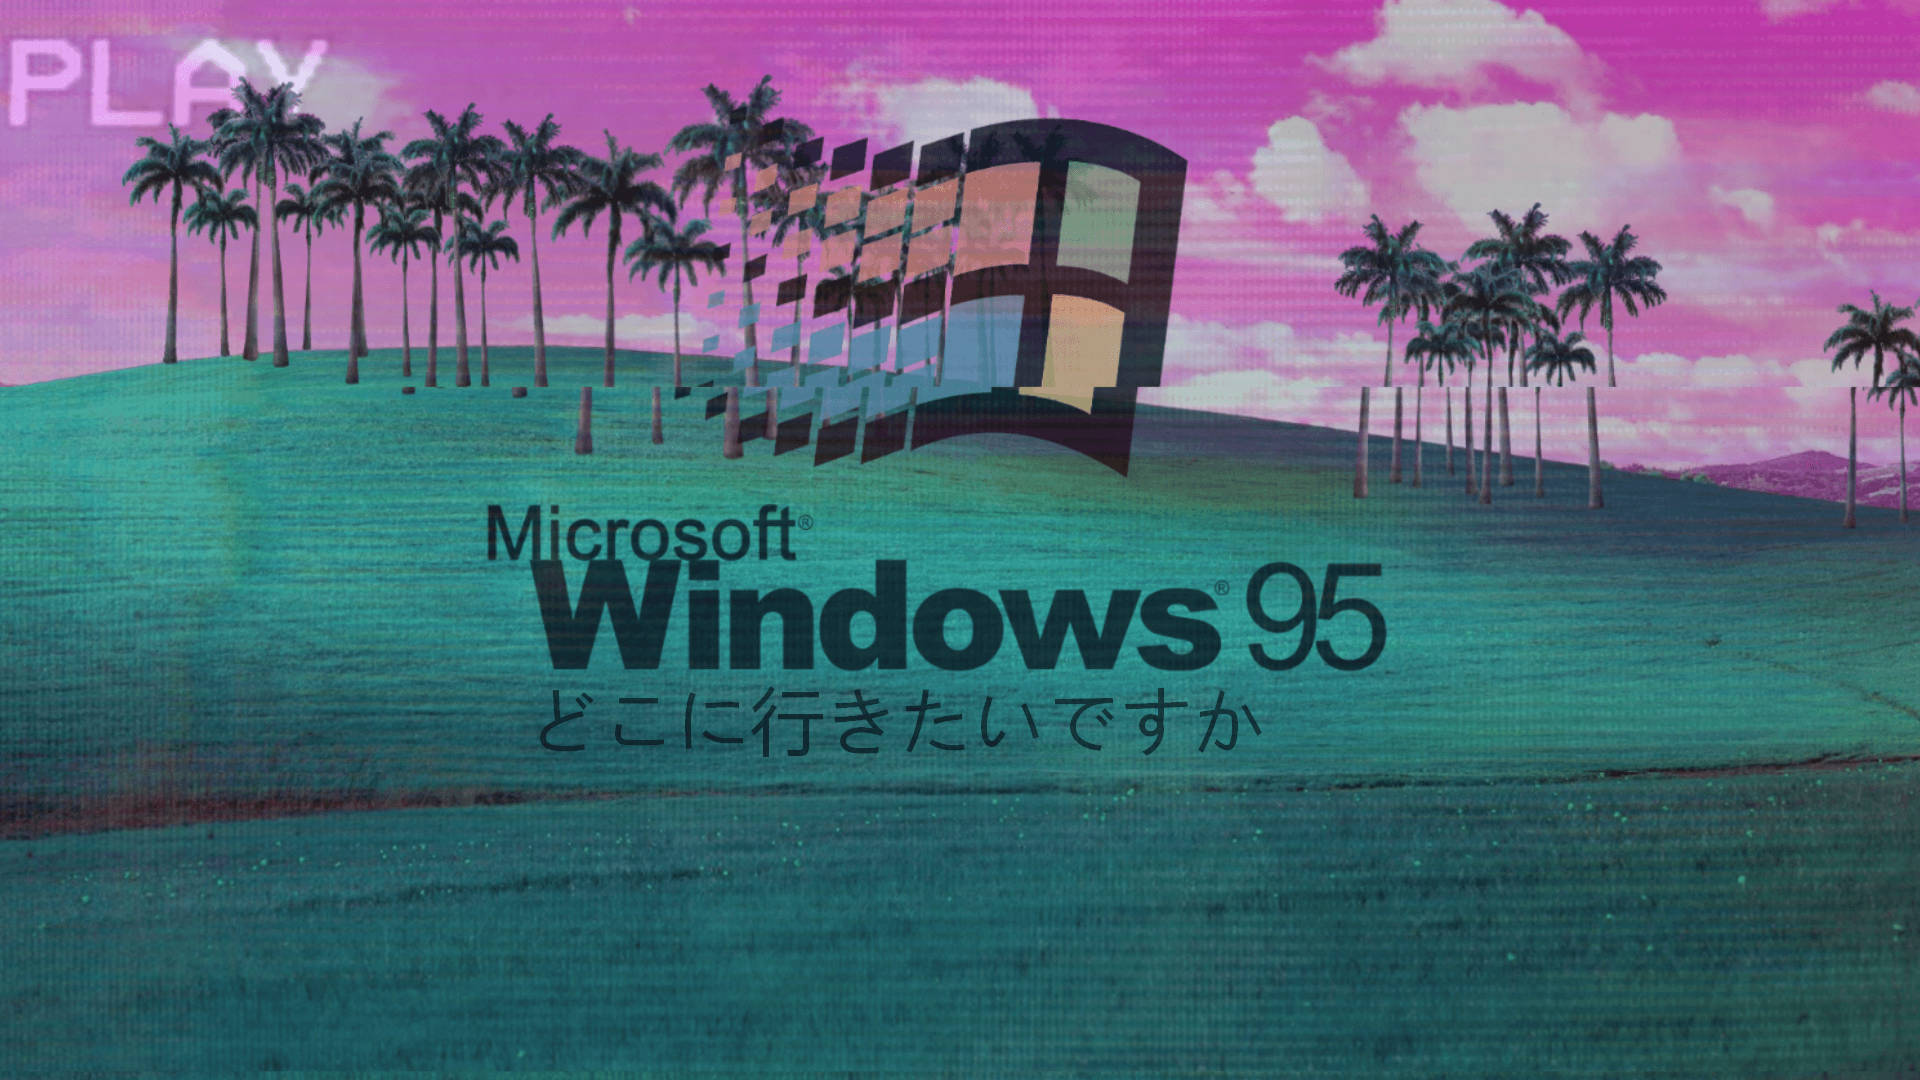 : A Vaporwave Aesthetic of the Microsoft Windows 95 Operating System Wallpaper